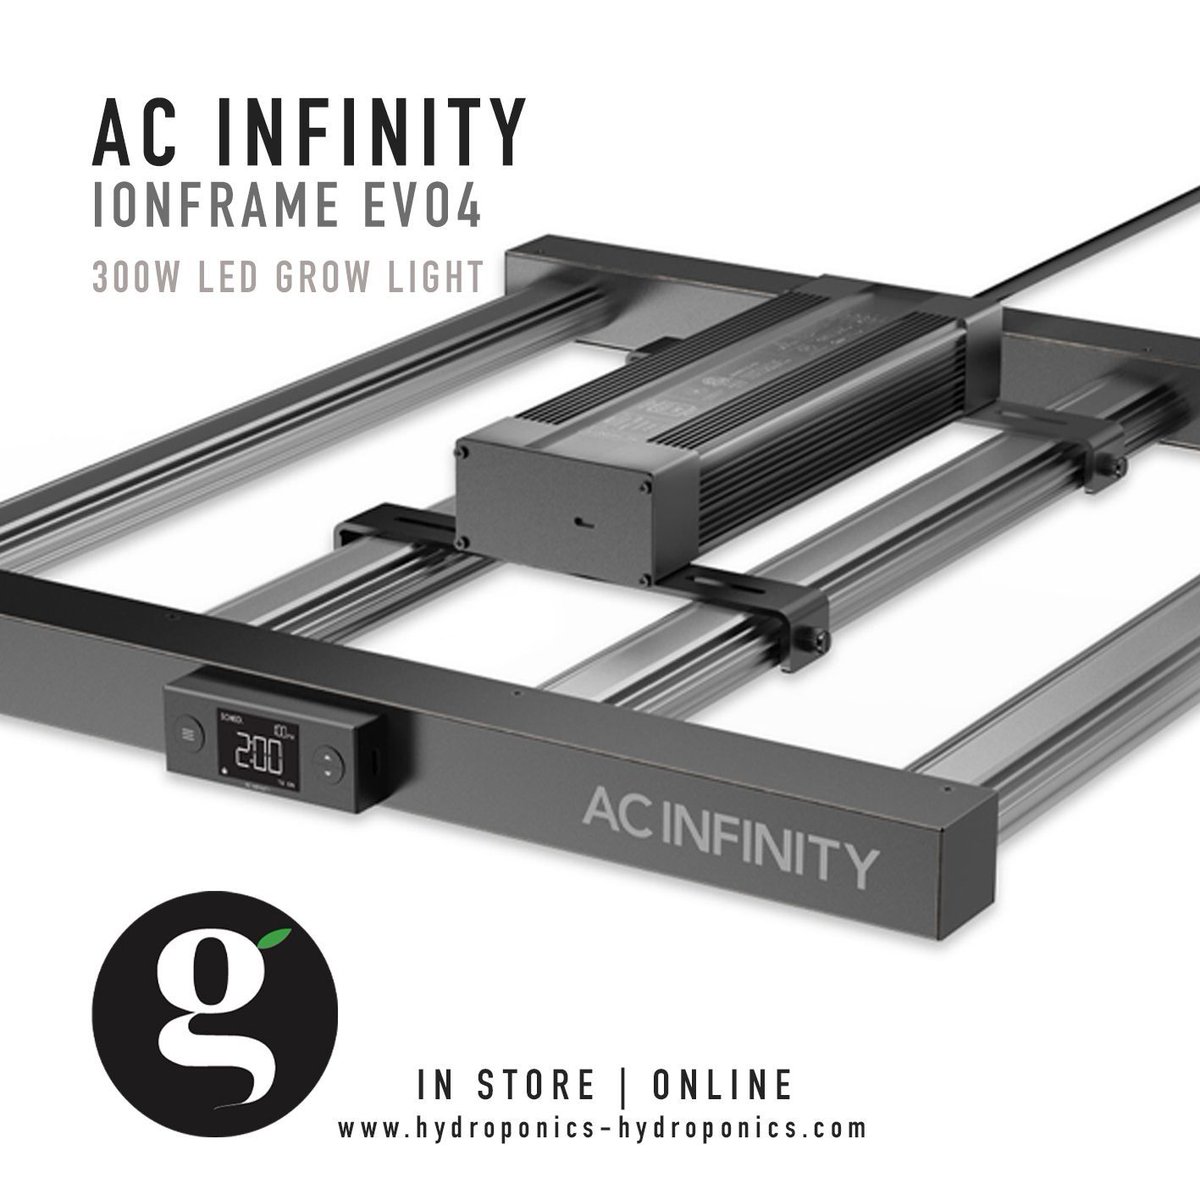 NEW IN: IONFRAME Series LED Grow Lights from AC Infinity

Available in store & online
EVO6: buff.ly/4dchYcp 
EVO4: buff.ly/3UyGCN5 

#acinfinity #IONFRAMEEVO6 #IONFRAMEEVO4 #ledgrowlights #ukhydro #greatstuffhydro #hydroponics #indoorgrowing